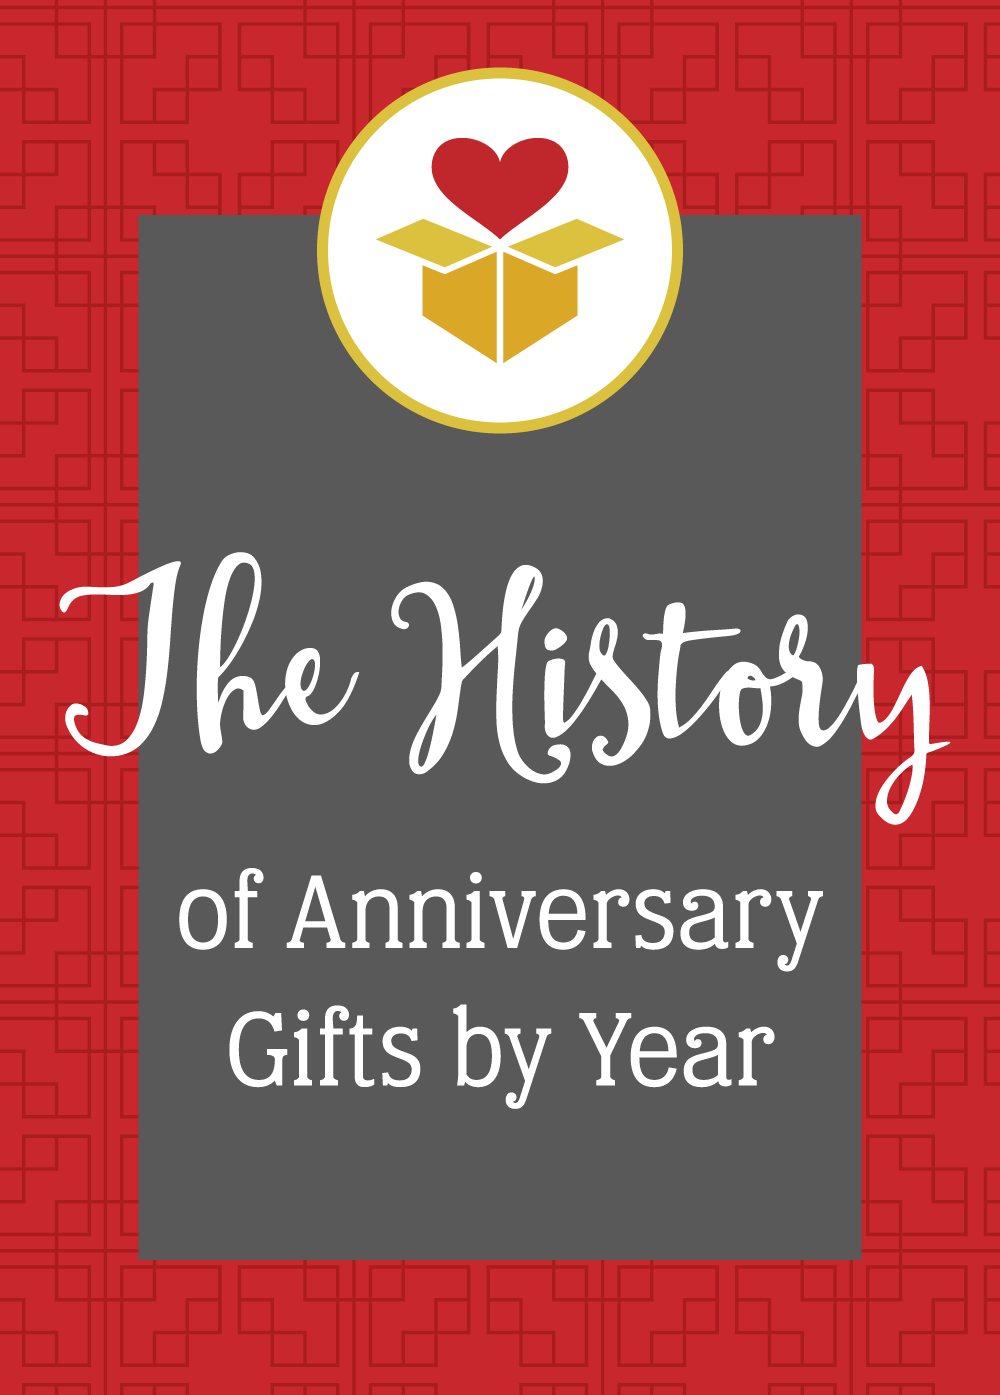 7th Anniversary Gifts: Best Traditional & Modern Gift Ideas » All Gifts  Considered